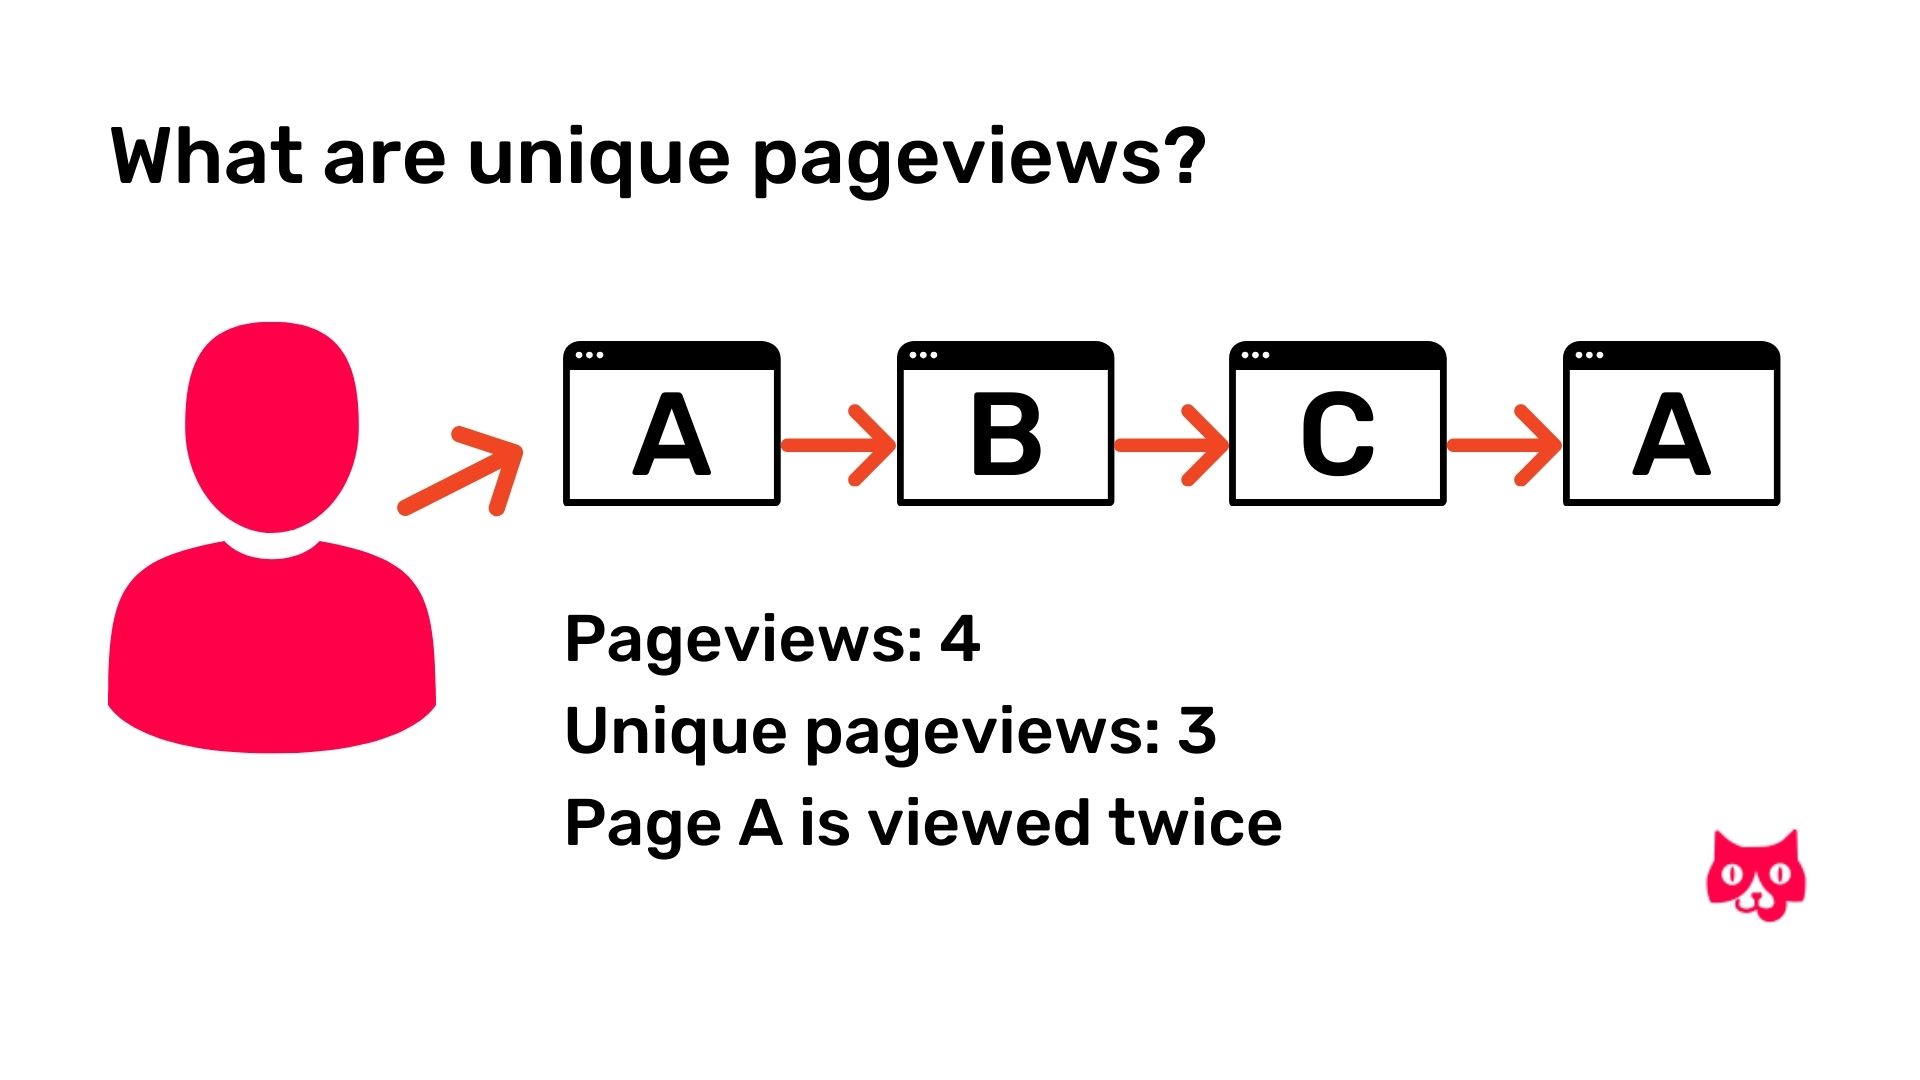 This image illustrates the content marketing metrics of unique pageviews. There is an avatar on the left that is shown to have visited several different websites, but only 3 out of 4 being websites he only visited once. Those are the unique pageviews.